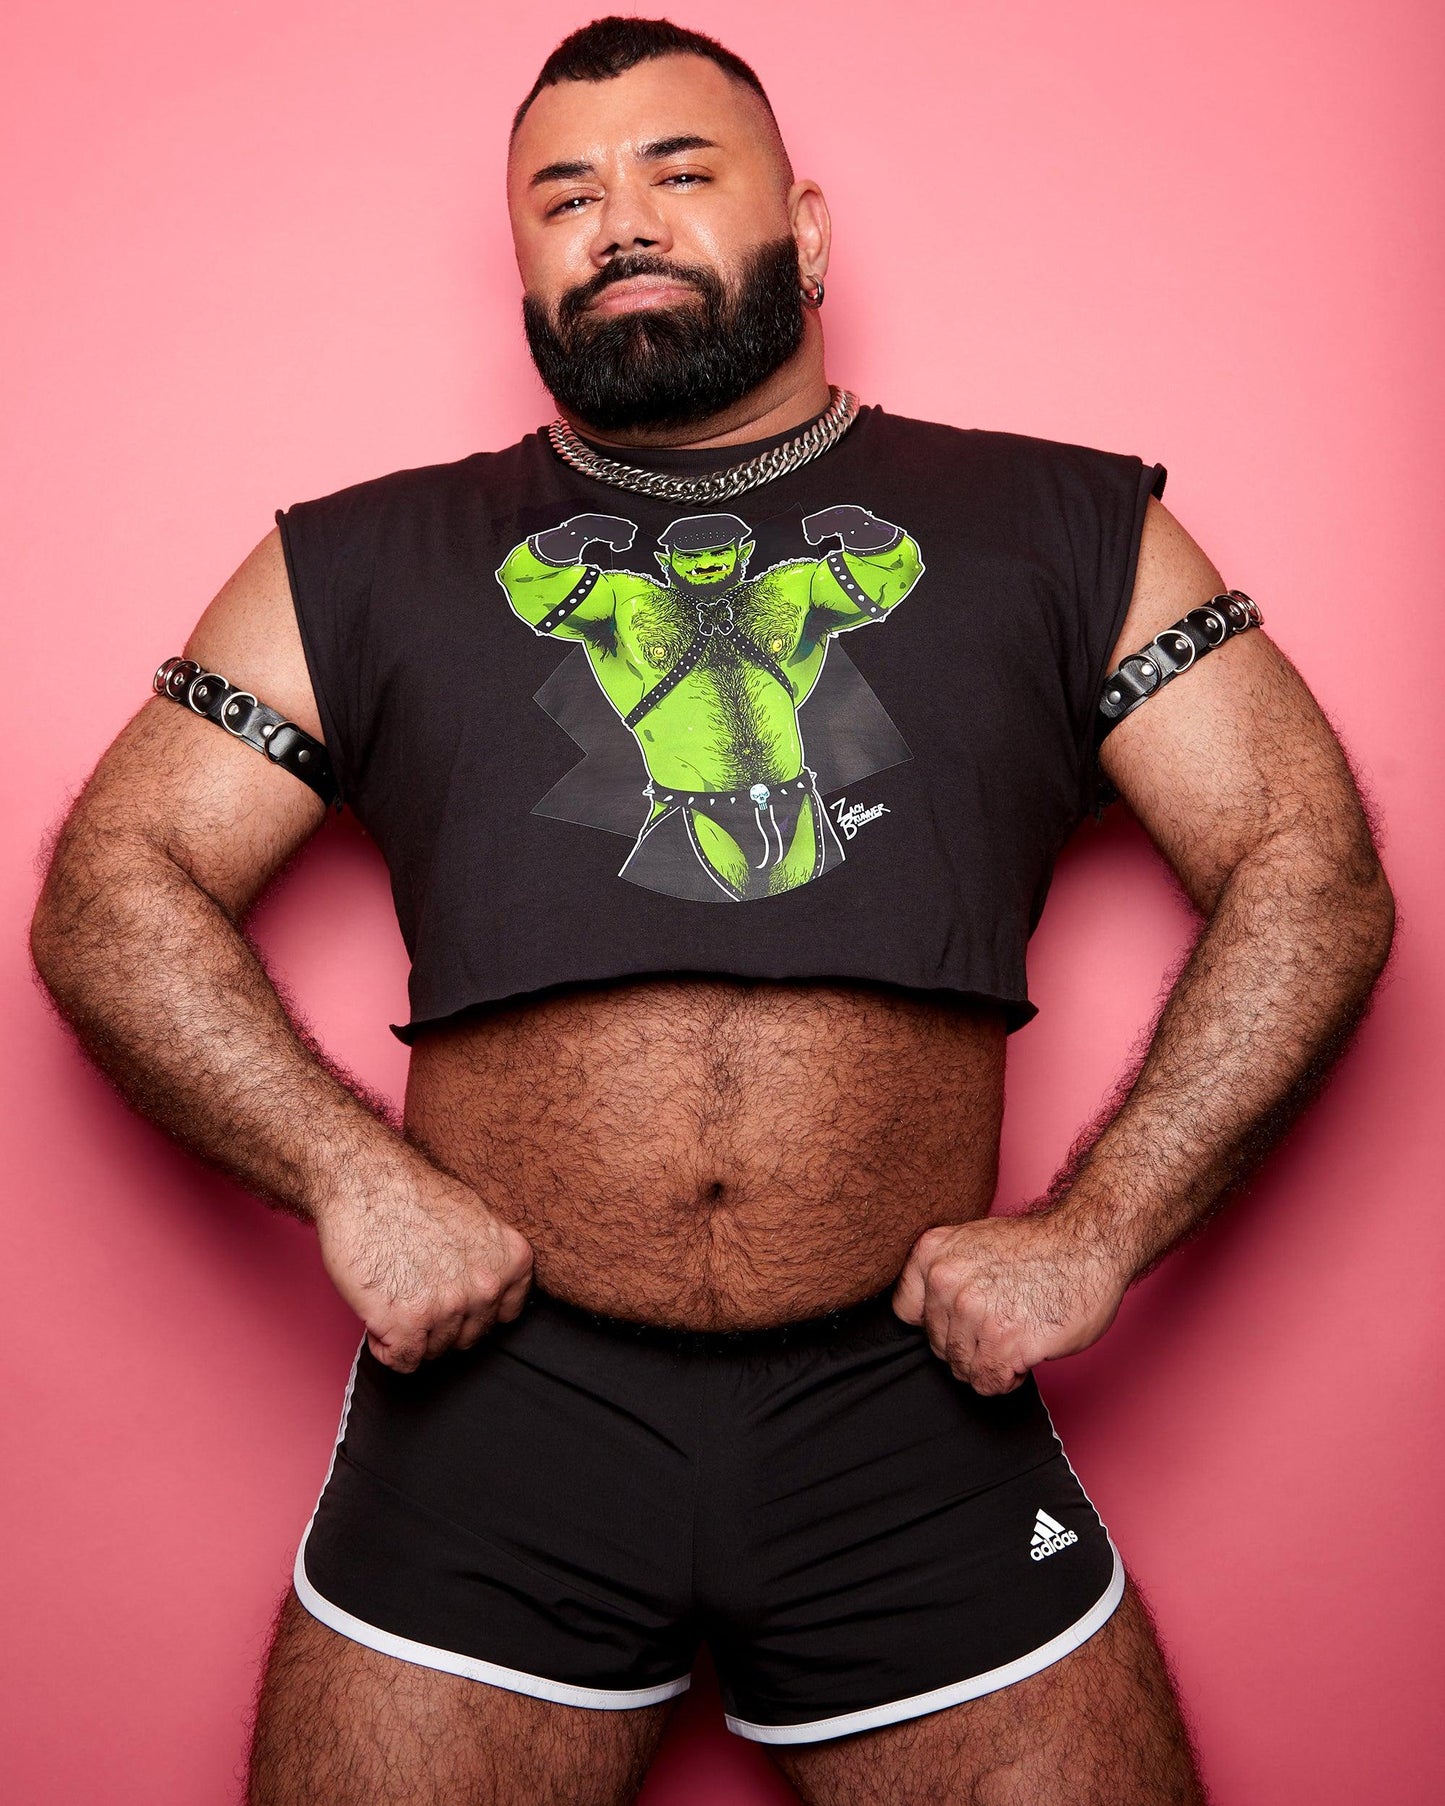 ZACH BRUNNER! Leather daddy orc Rex loves to flex - sleeveless crop top